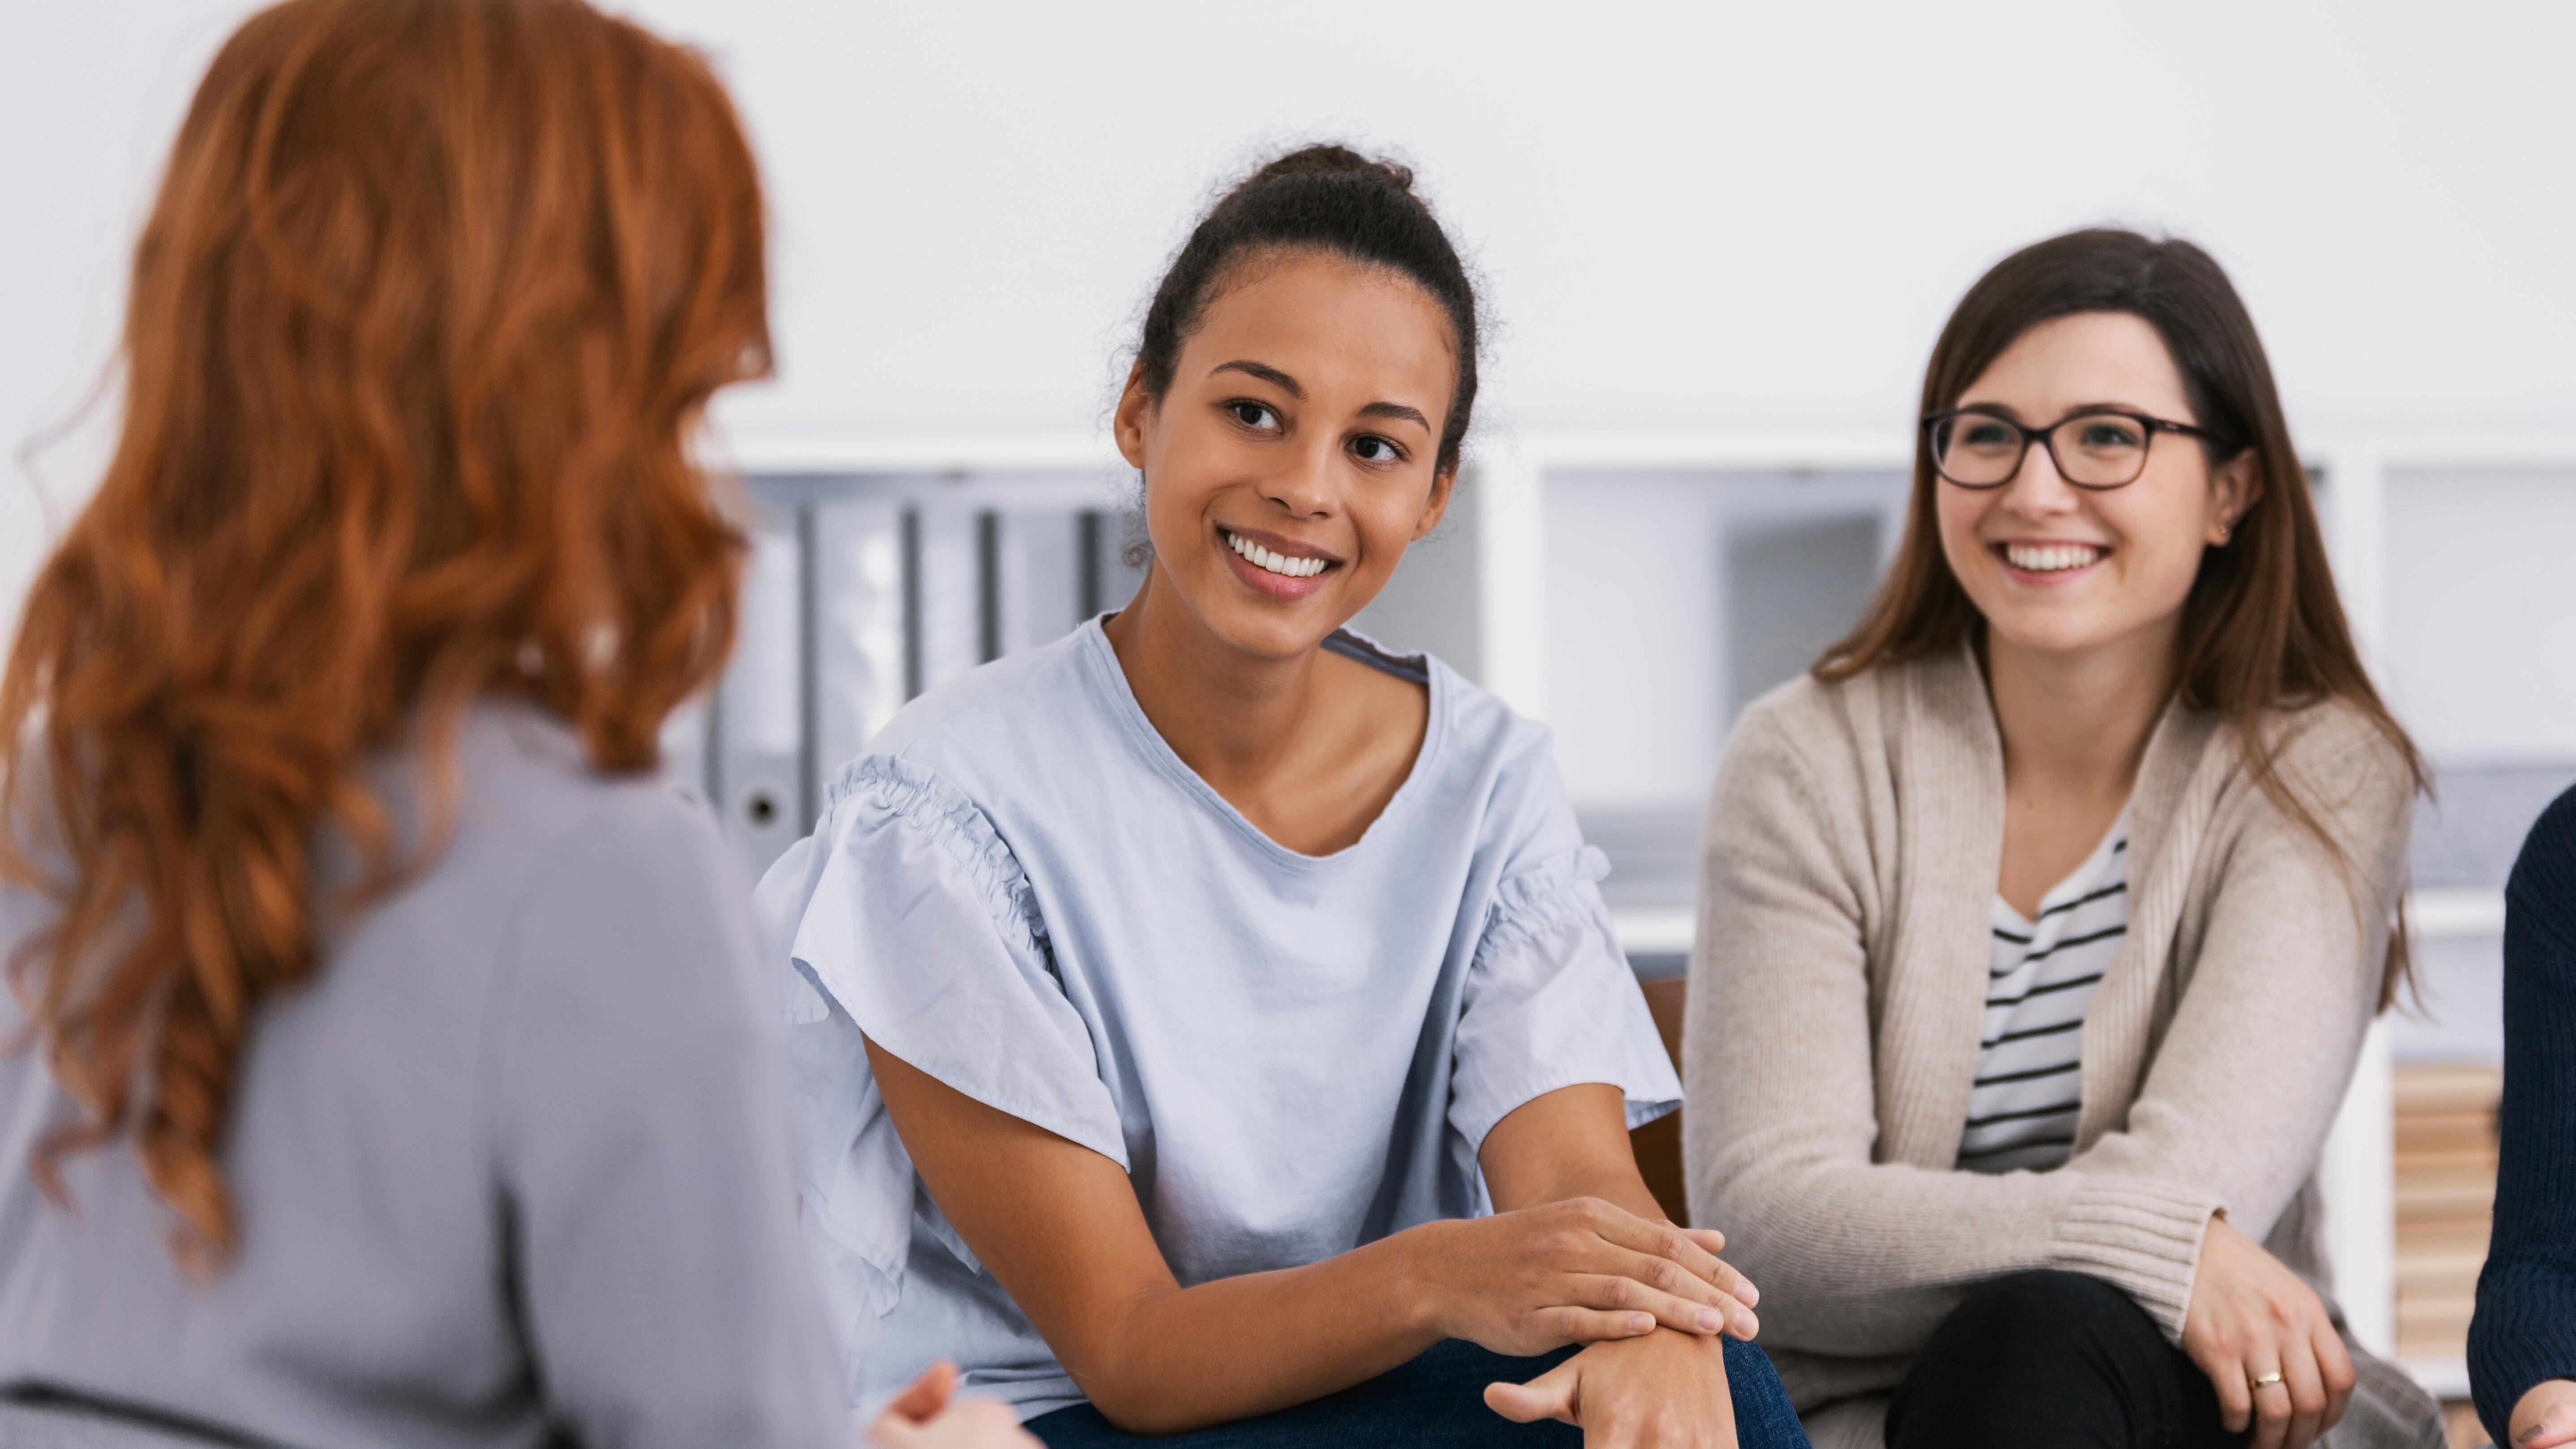 Women with problems sitting together during counseling - social work